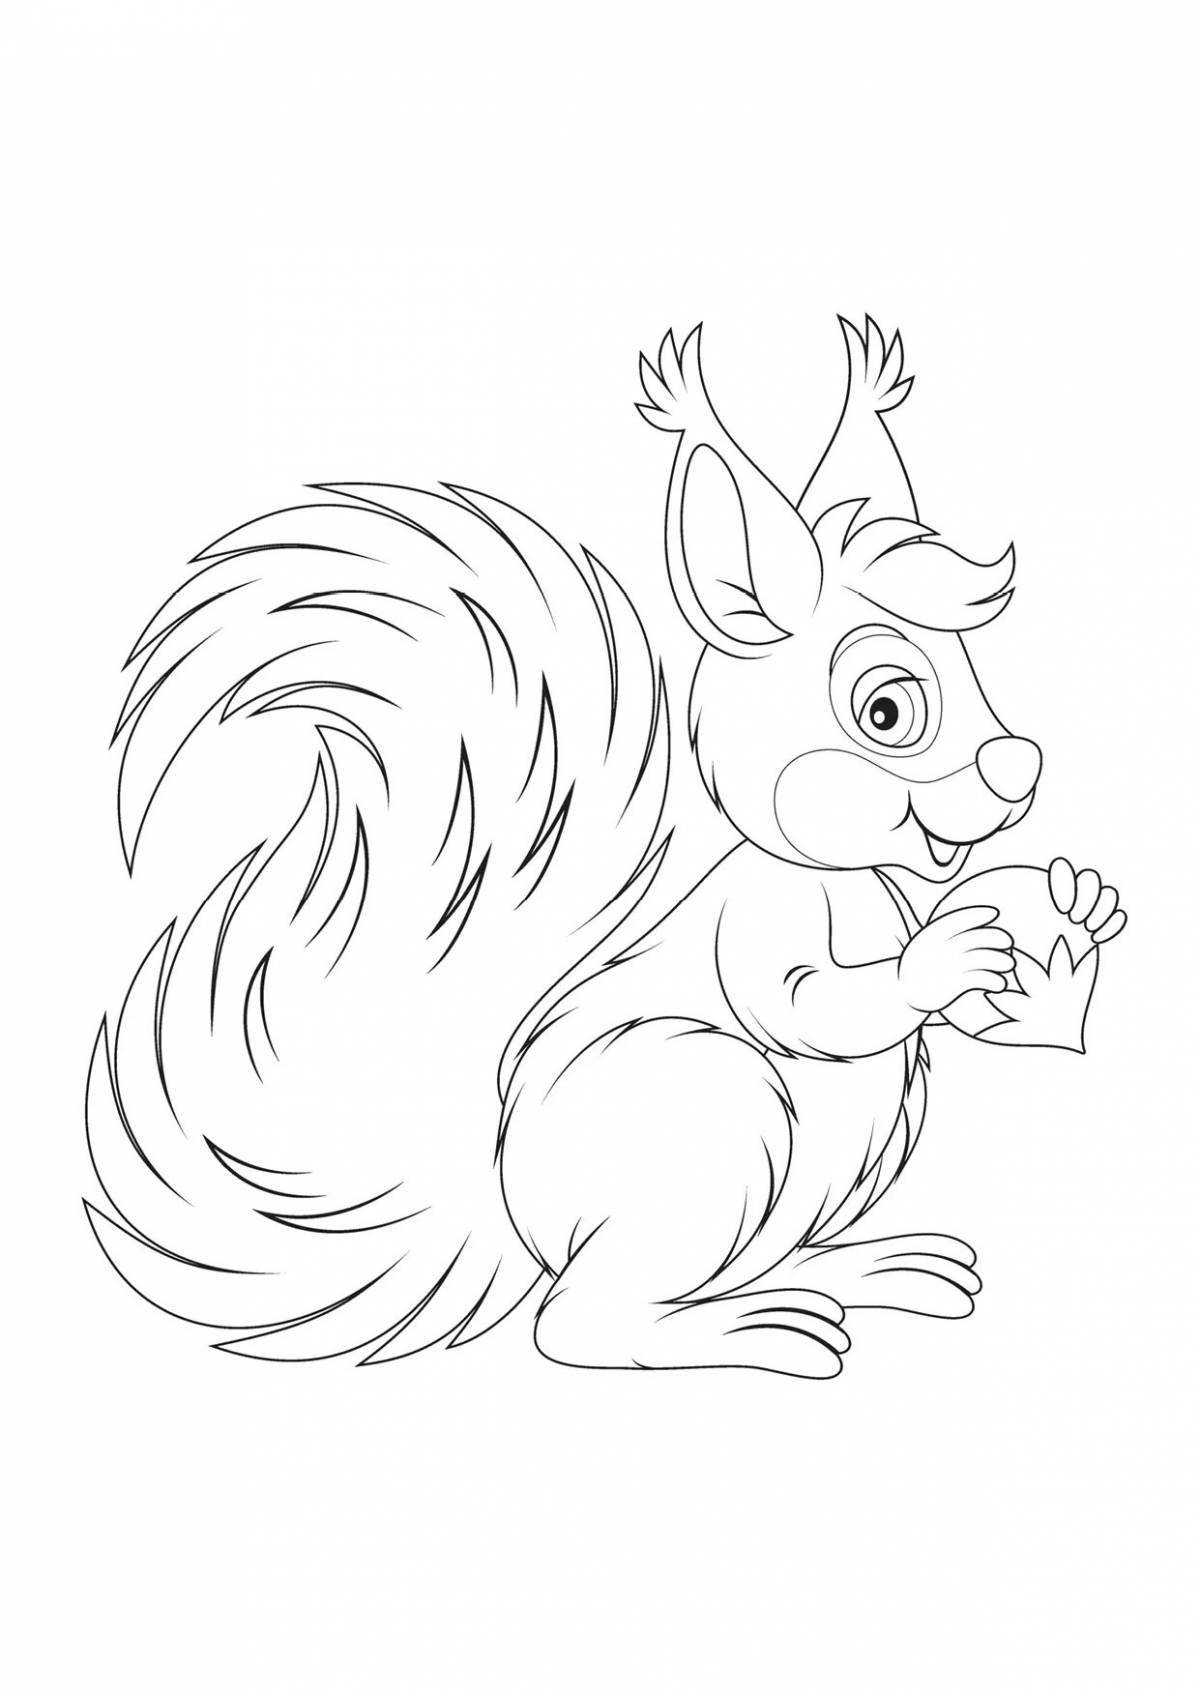 Bright squirrel coloring book for children 6-7 years old